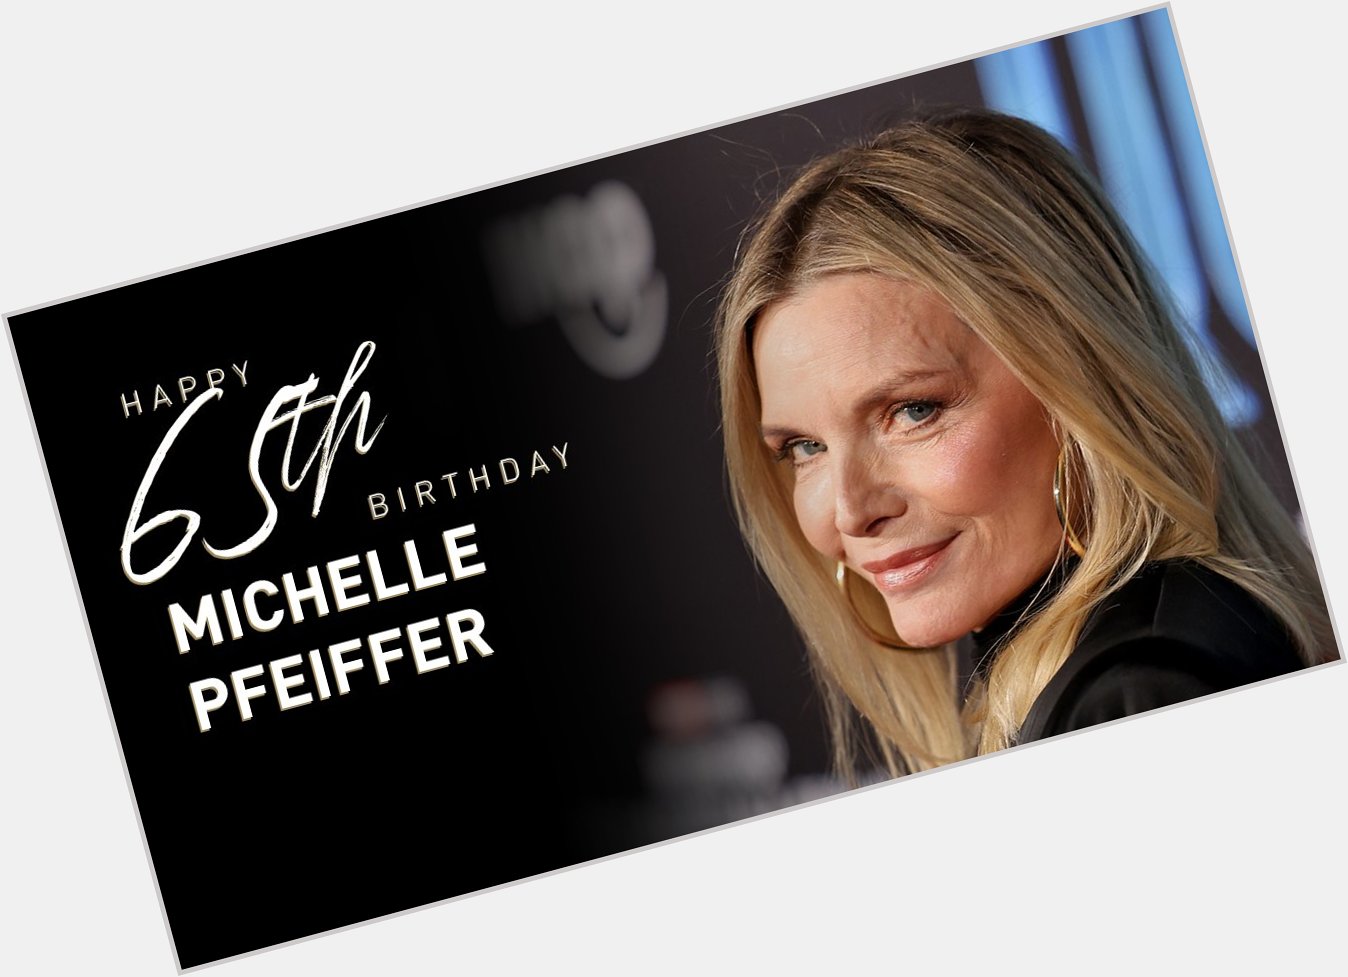 Happy 65th birthday Michelle Pfeiffer!

Read her tribute here:  